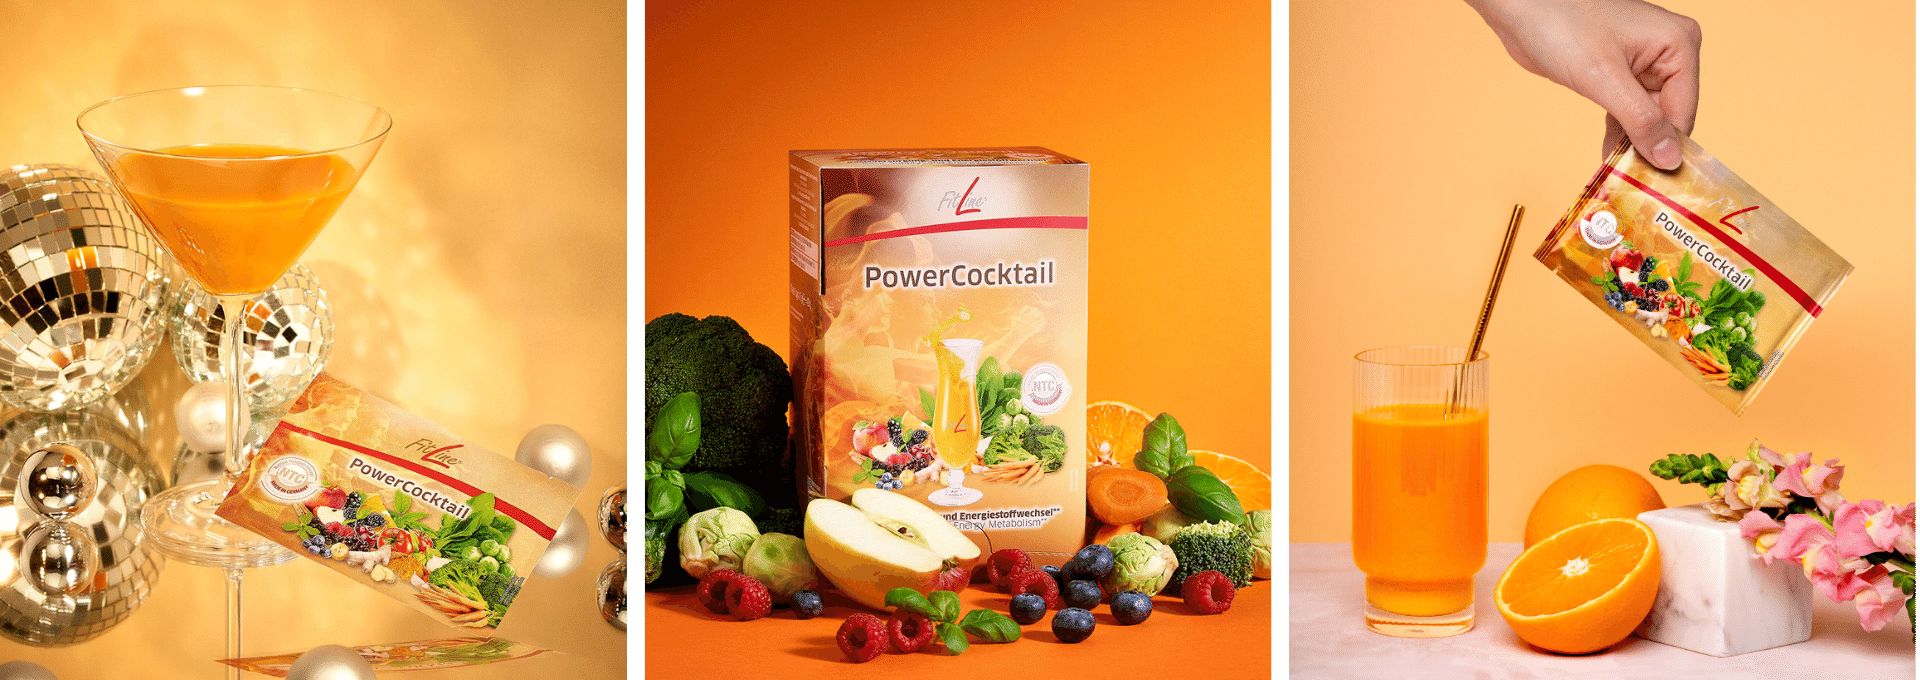 FitLine PowerCocktail